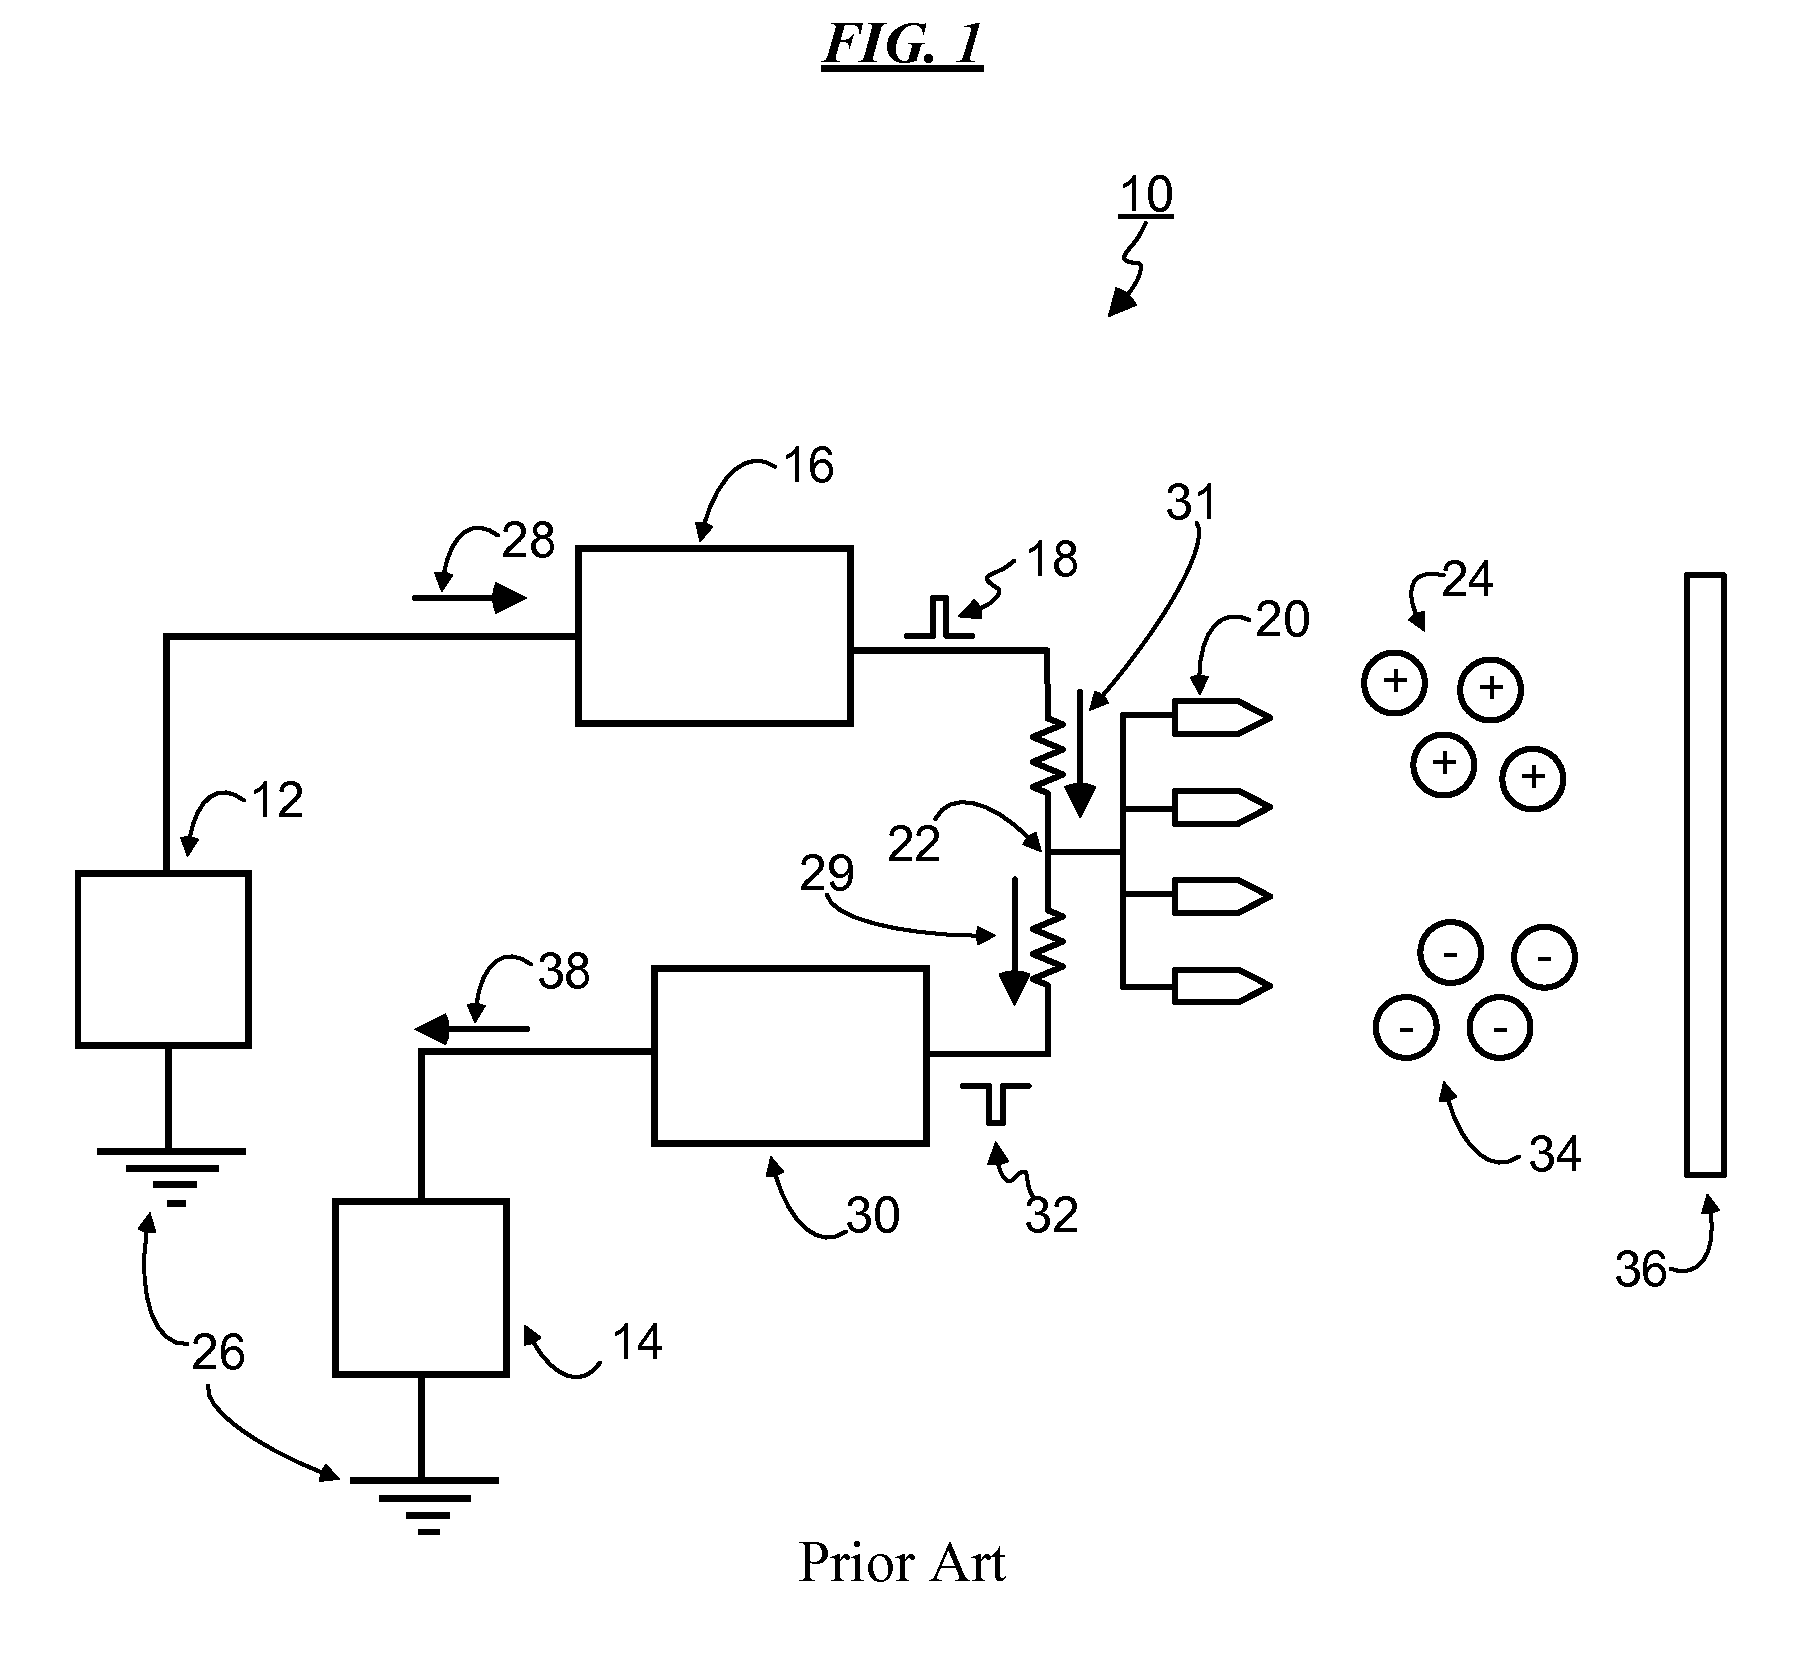 Control system for static neutralizer